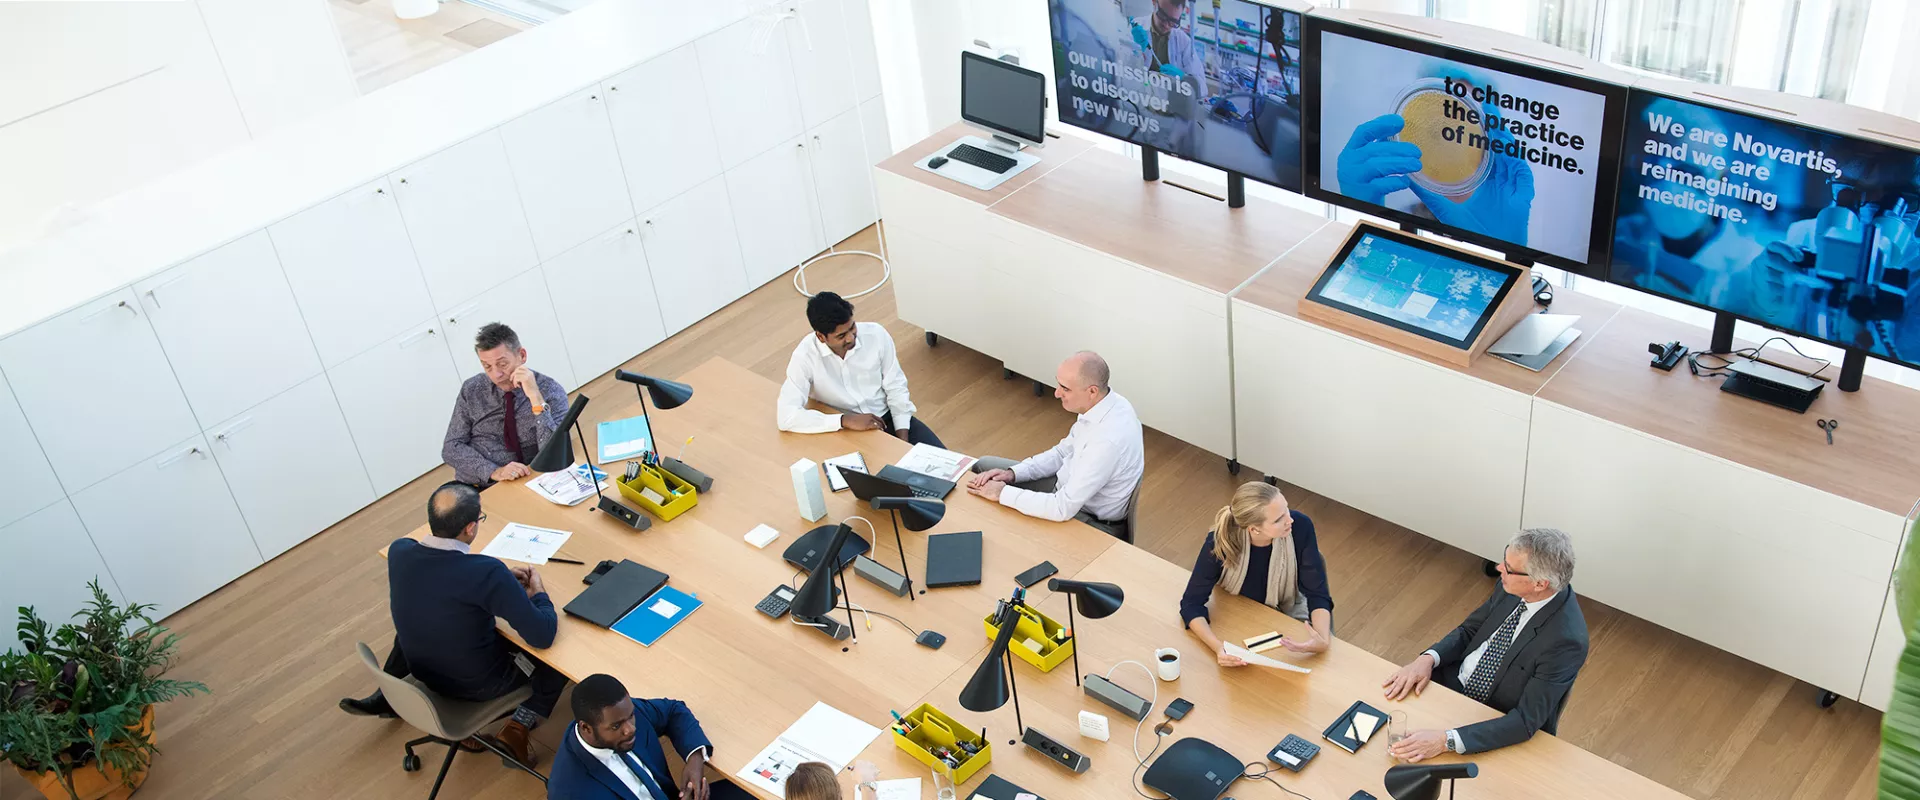 Overhead view of a meeting room with people in the foreground and screens in the background